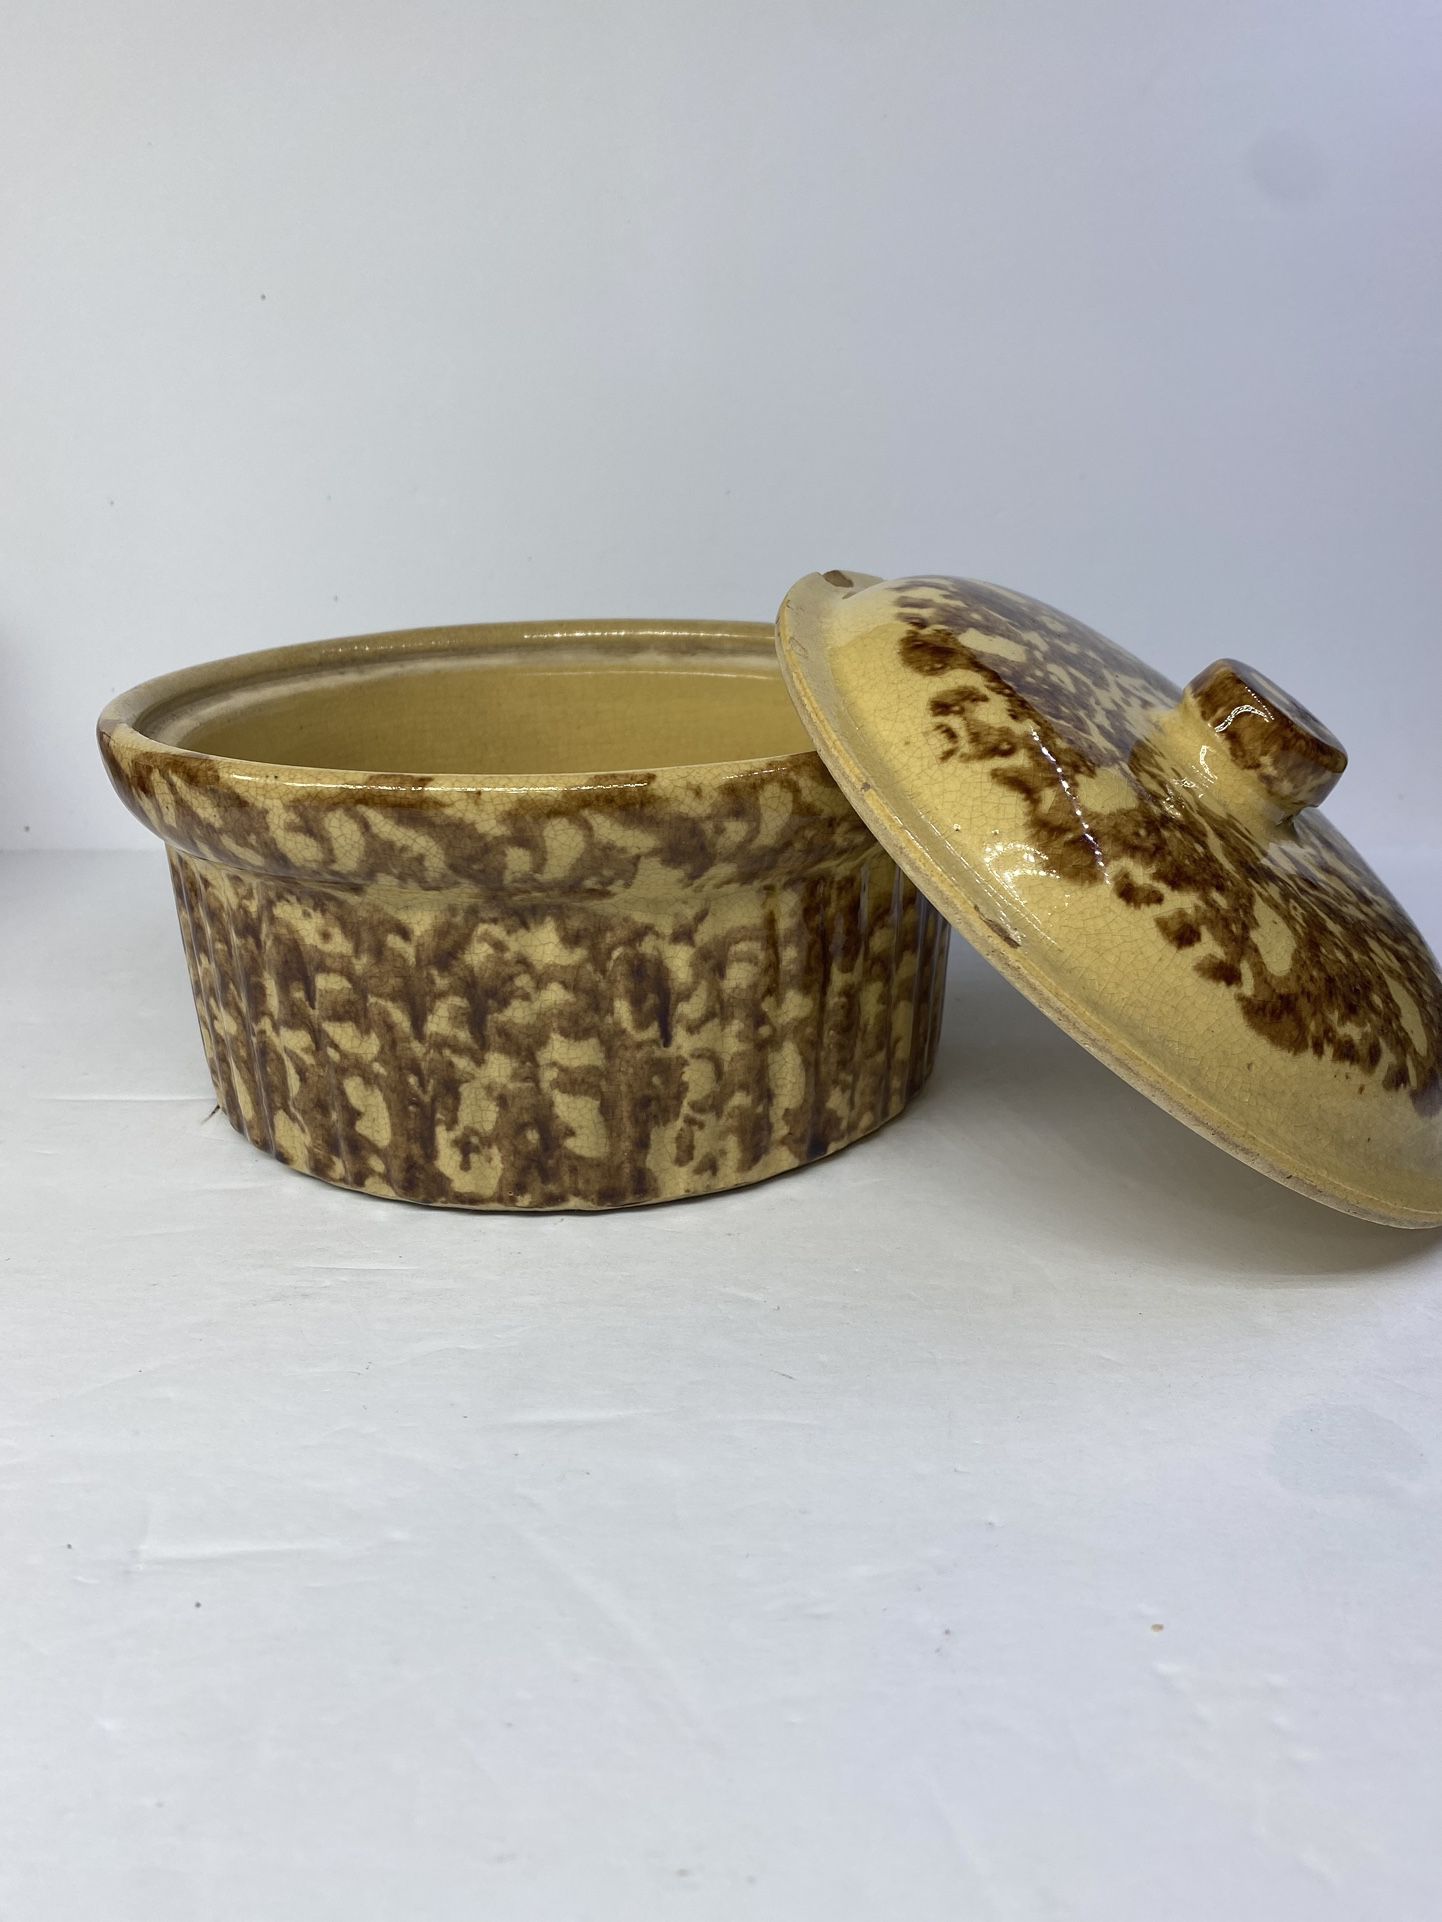 Early Antique Medium Rockingham Glazed Yellow Ware Deep Dish Stoneware Casserole With Lid. Shallow chip on lid. See pics. 